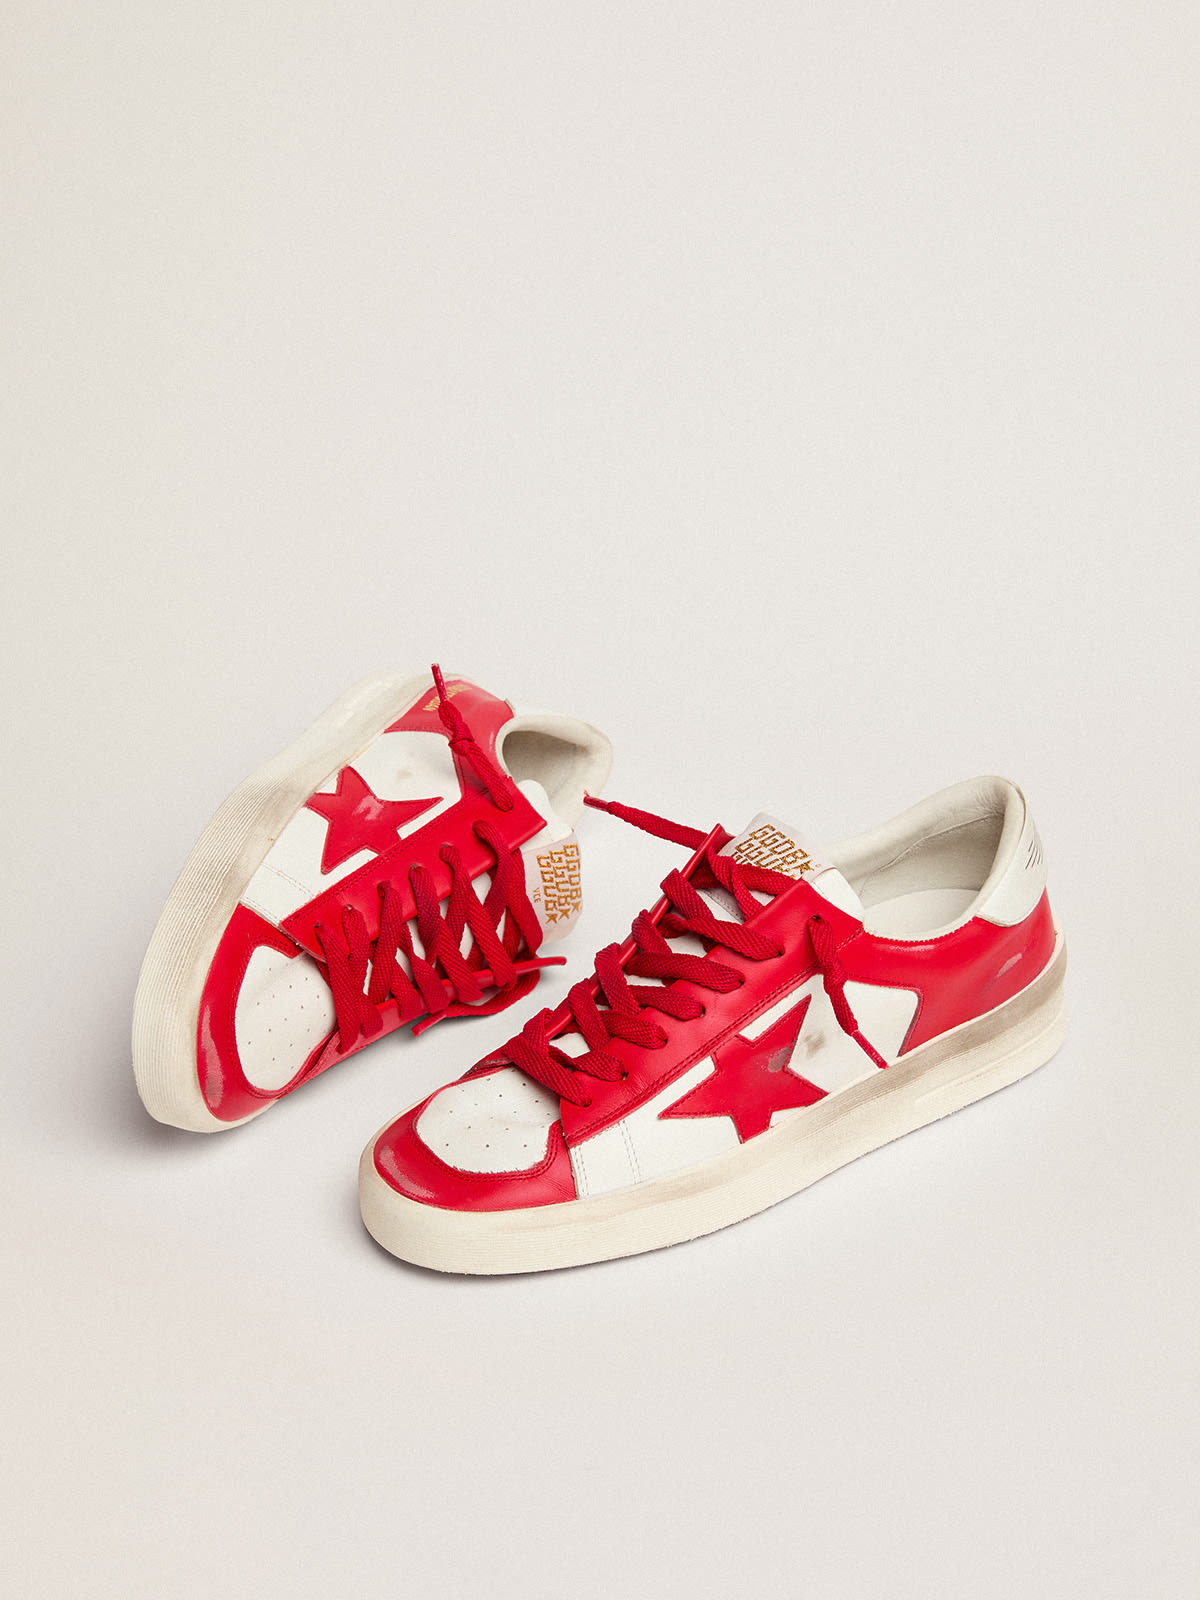 Golden Goose - Women's Stardan in white and red leather in 